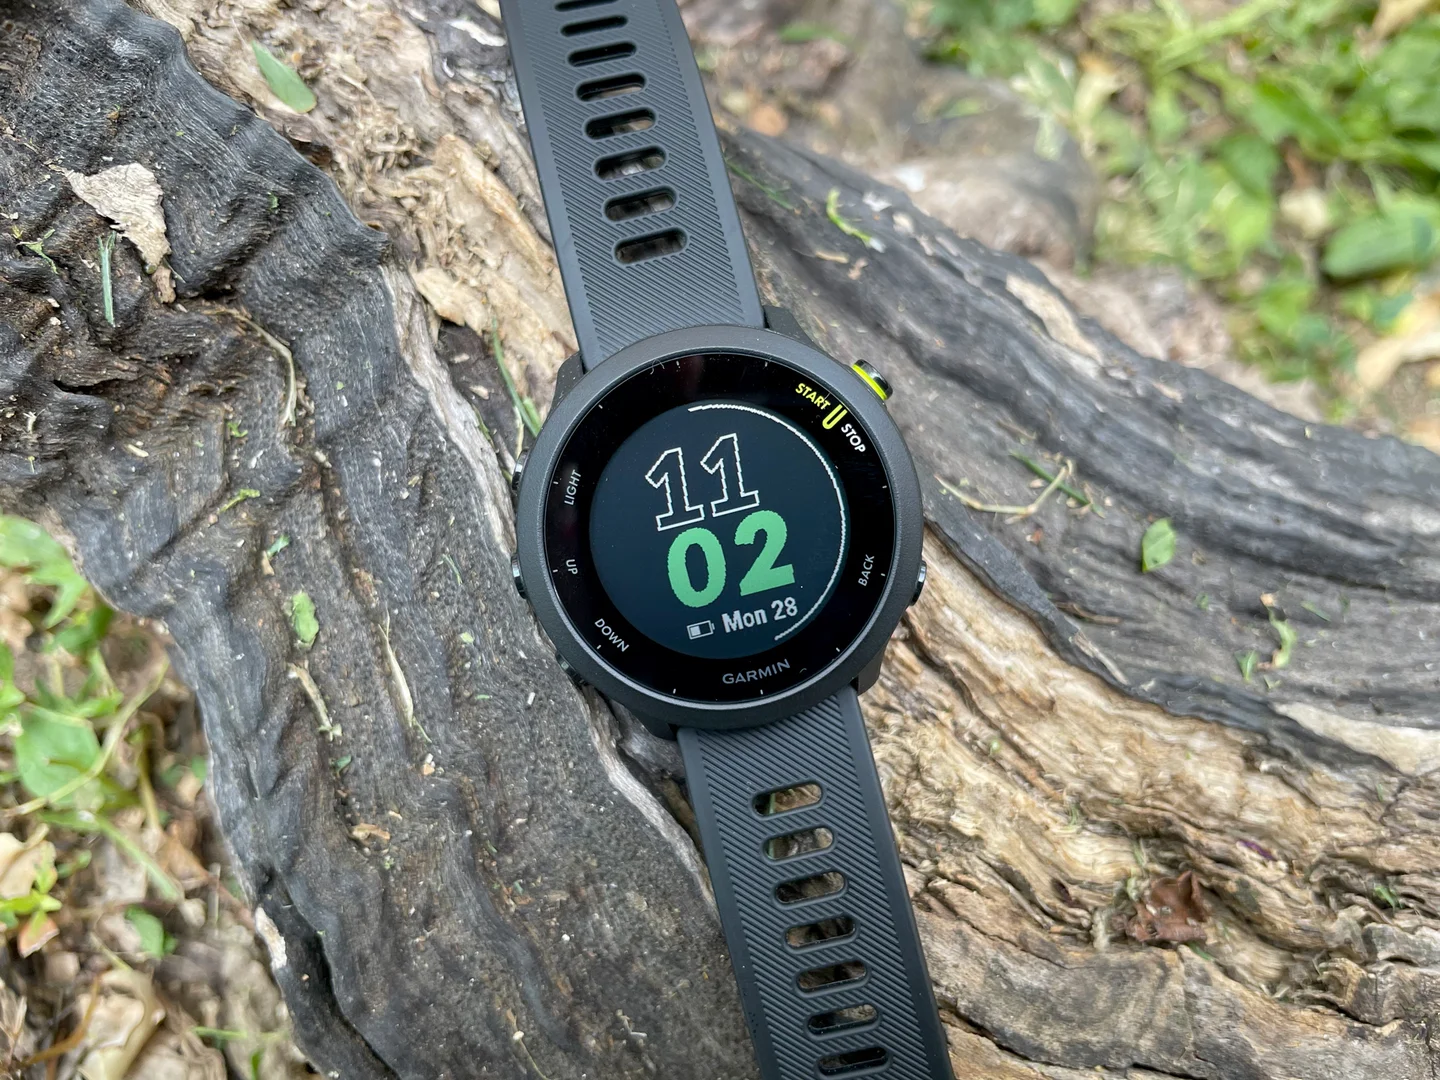 Garmin Forerunner 45 vs 55 - What is the Difference? 